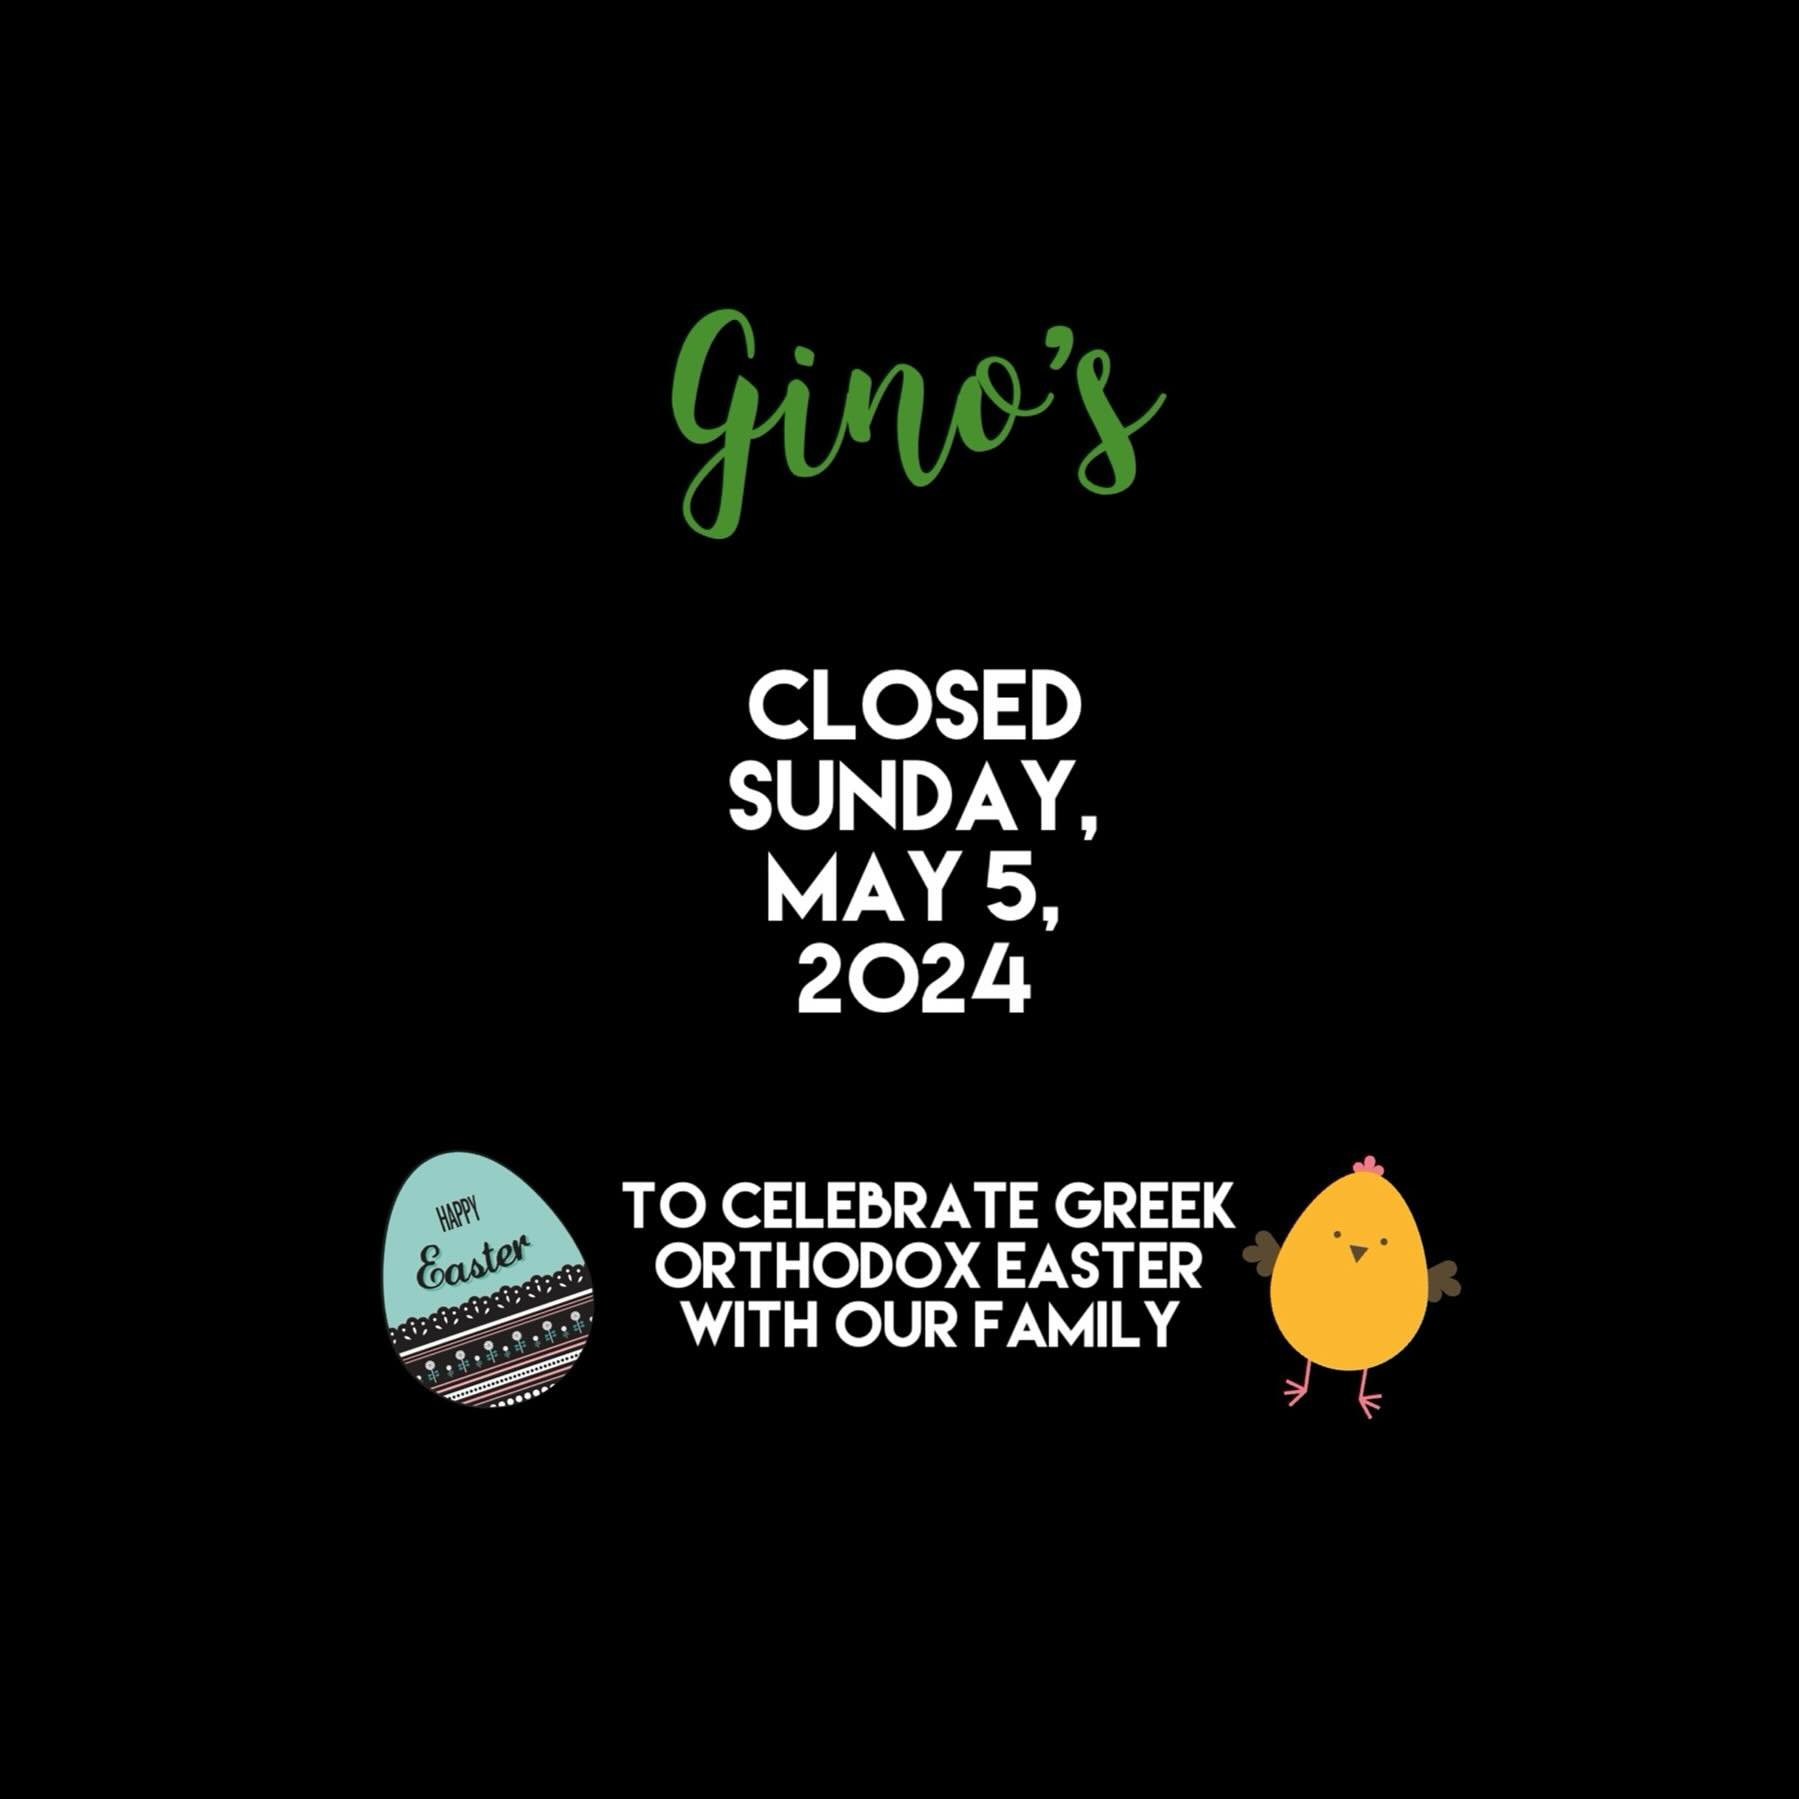 CLOSED SUNDAY, MAY 5, 2024

Gino&rsquo;s will be closed on Sunday, May 5, 2024 so that our family can celebrate Orthodox Easter together. Thank you for your understanding!
Happy Easter to those who celebrate! 🐣🐰🐥

DINE-IN/TAKEOUT/DELIVERY
📞 604-5